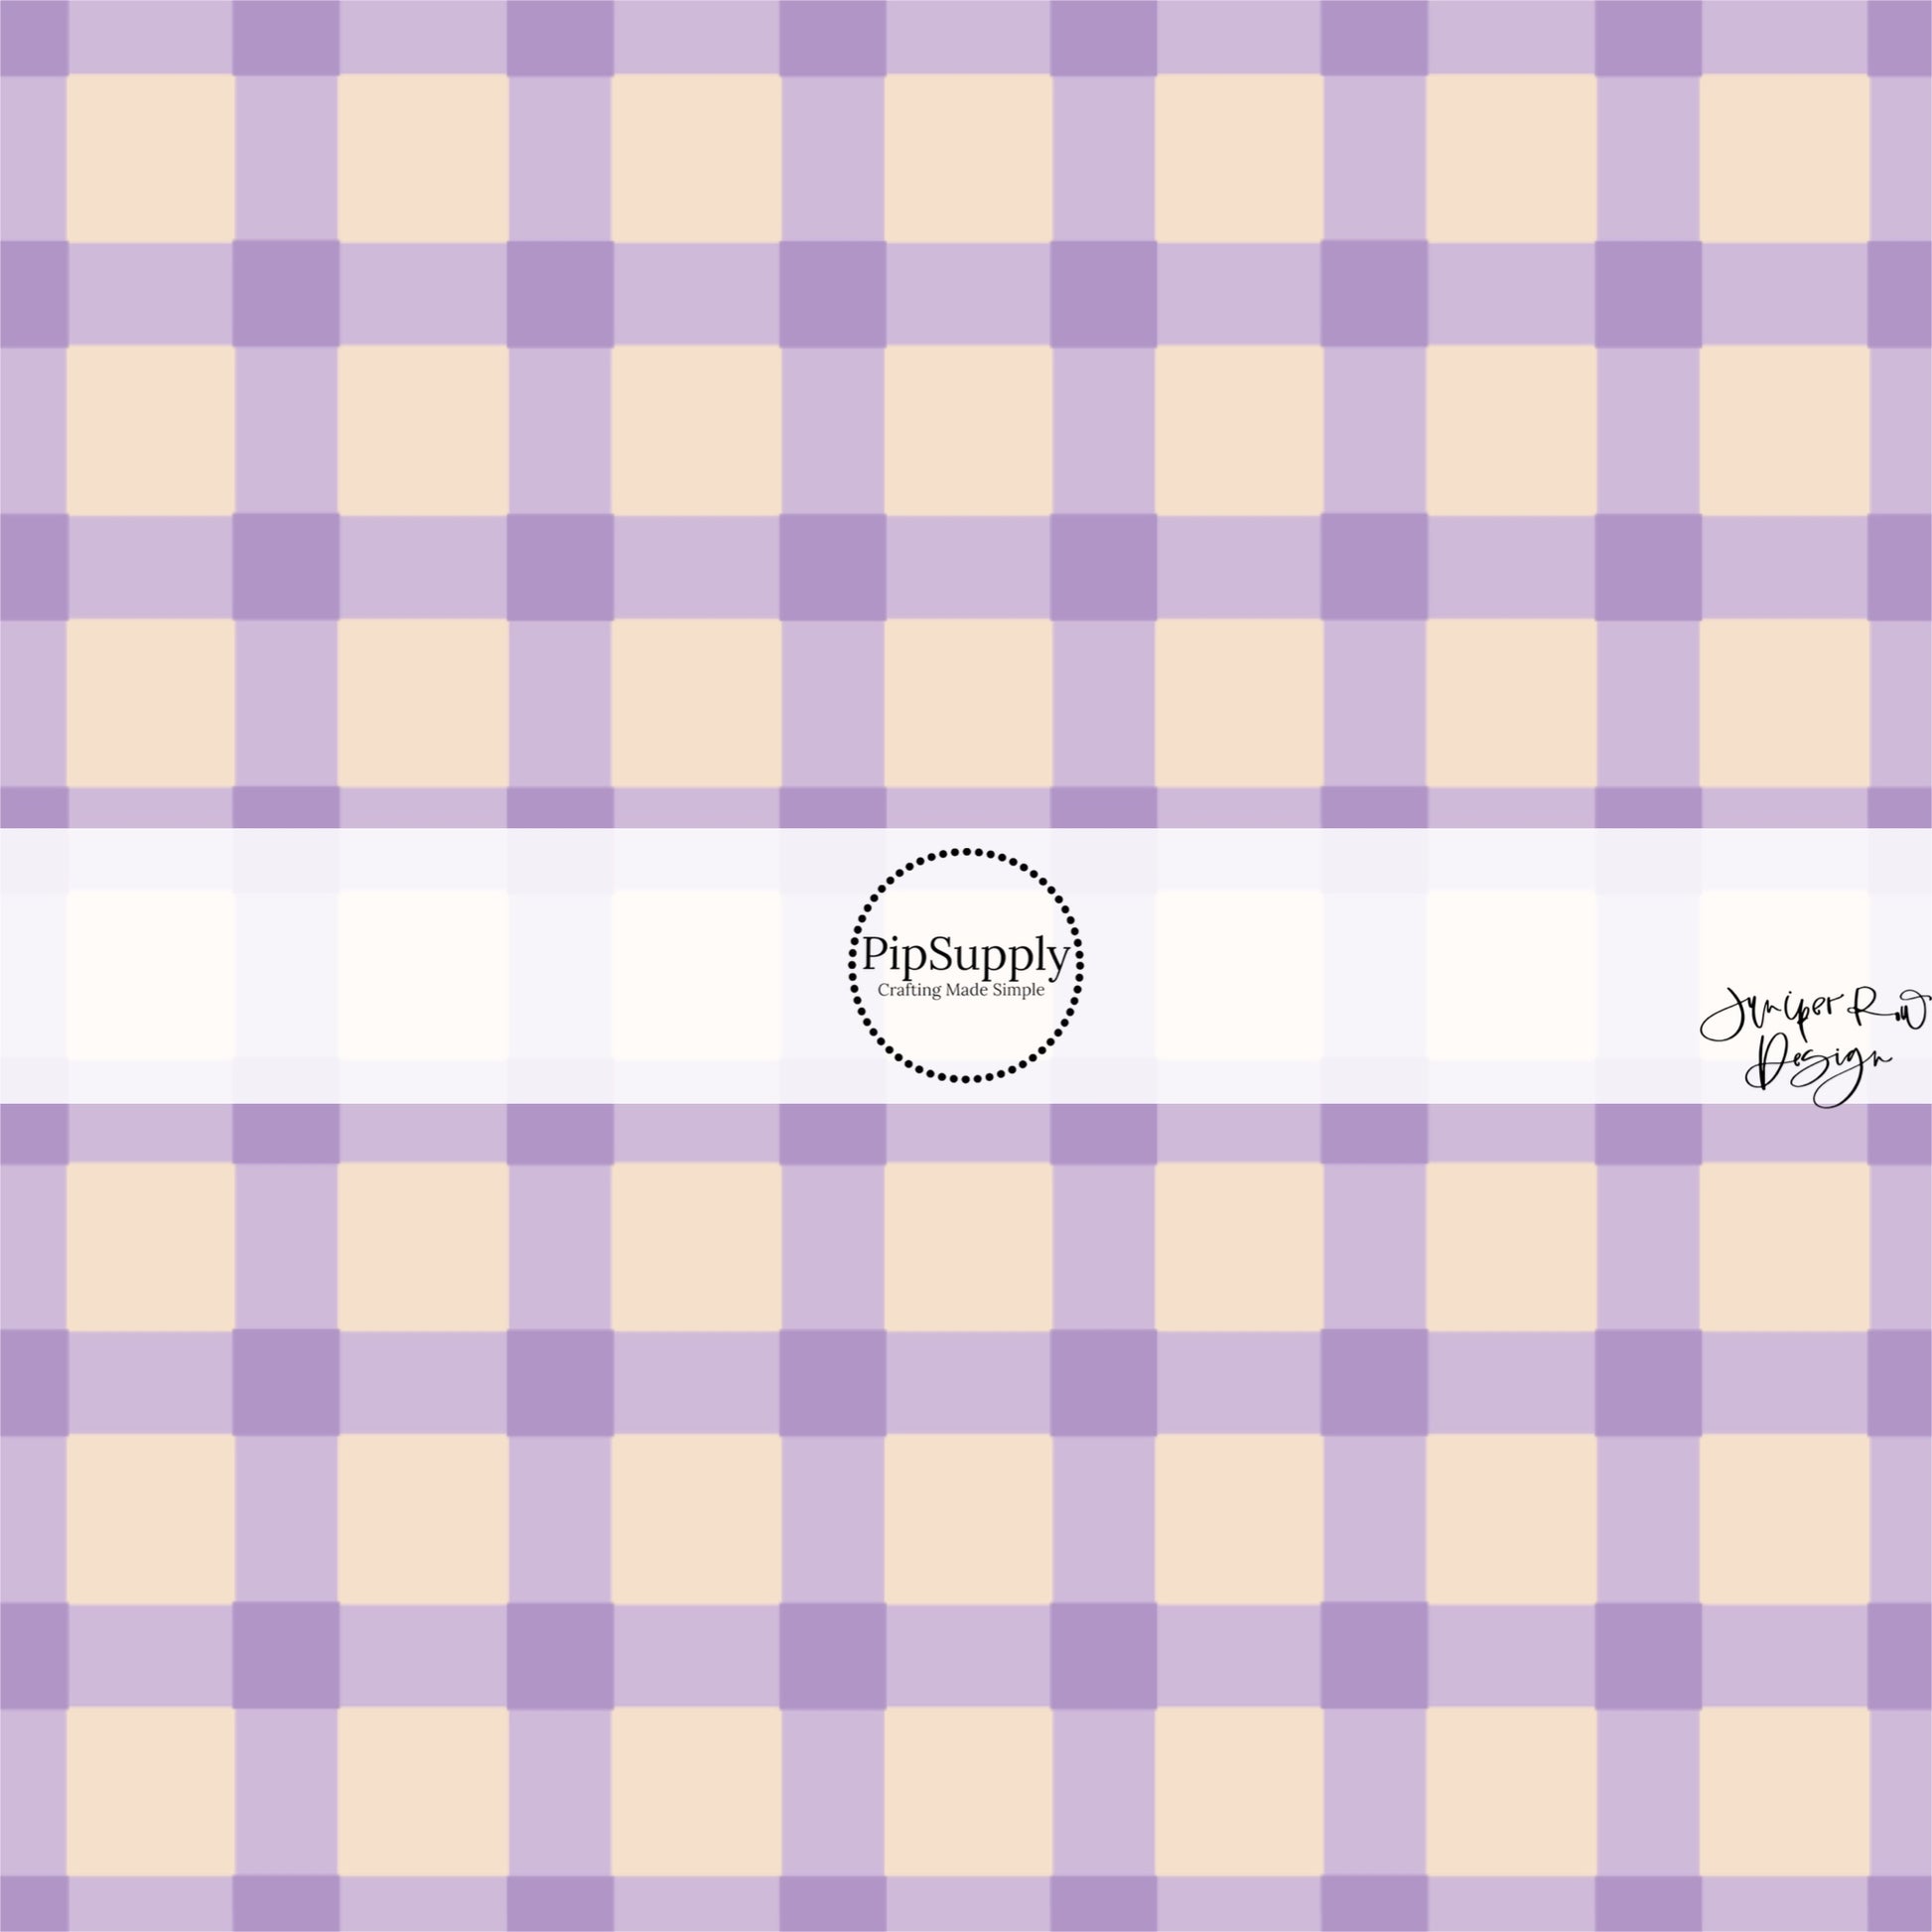 This summer fabric by the yard features summer haze purple and cream plaid pattern. This fun summer themed fabric can be used for all your sewing and crafting needs!&nbsp;